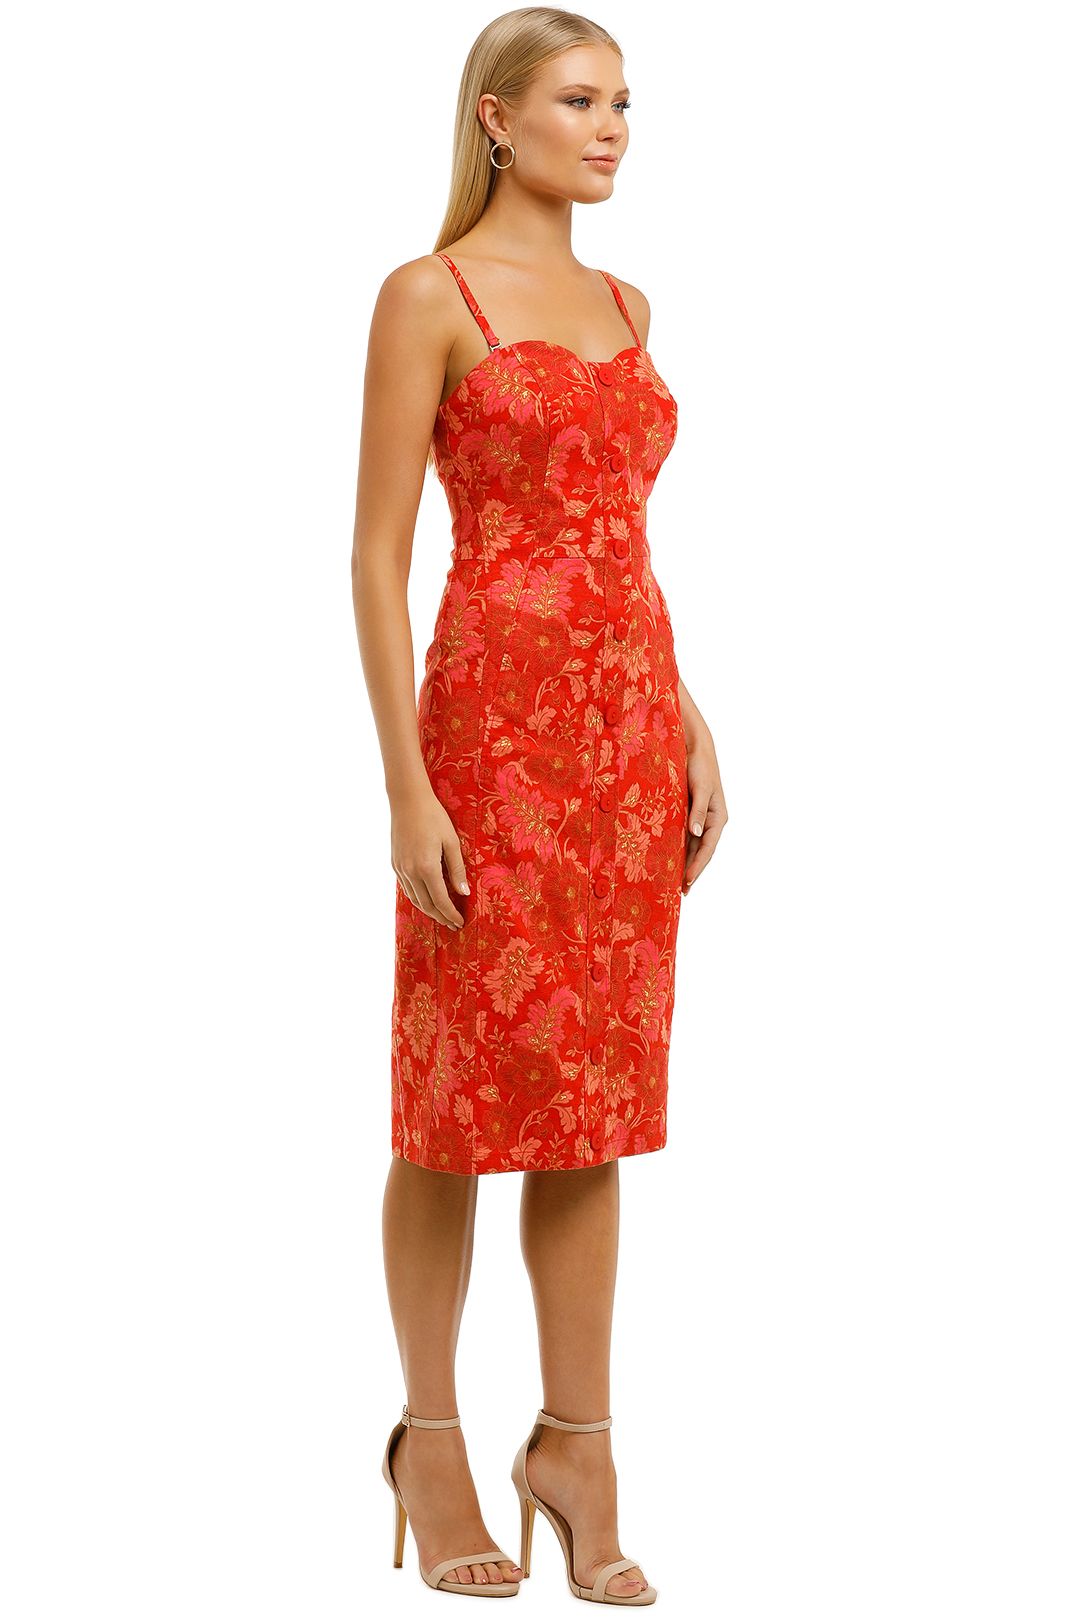 Ministry-of-Style-Hibiscus-Strapless-Dress-Print-Side